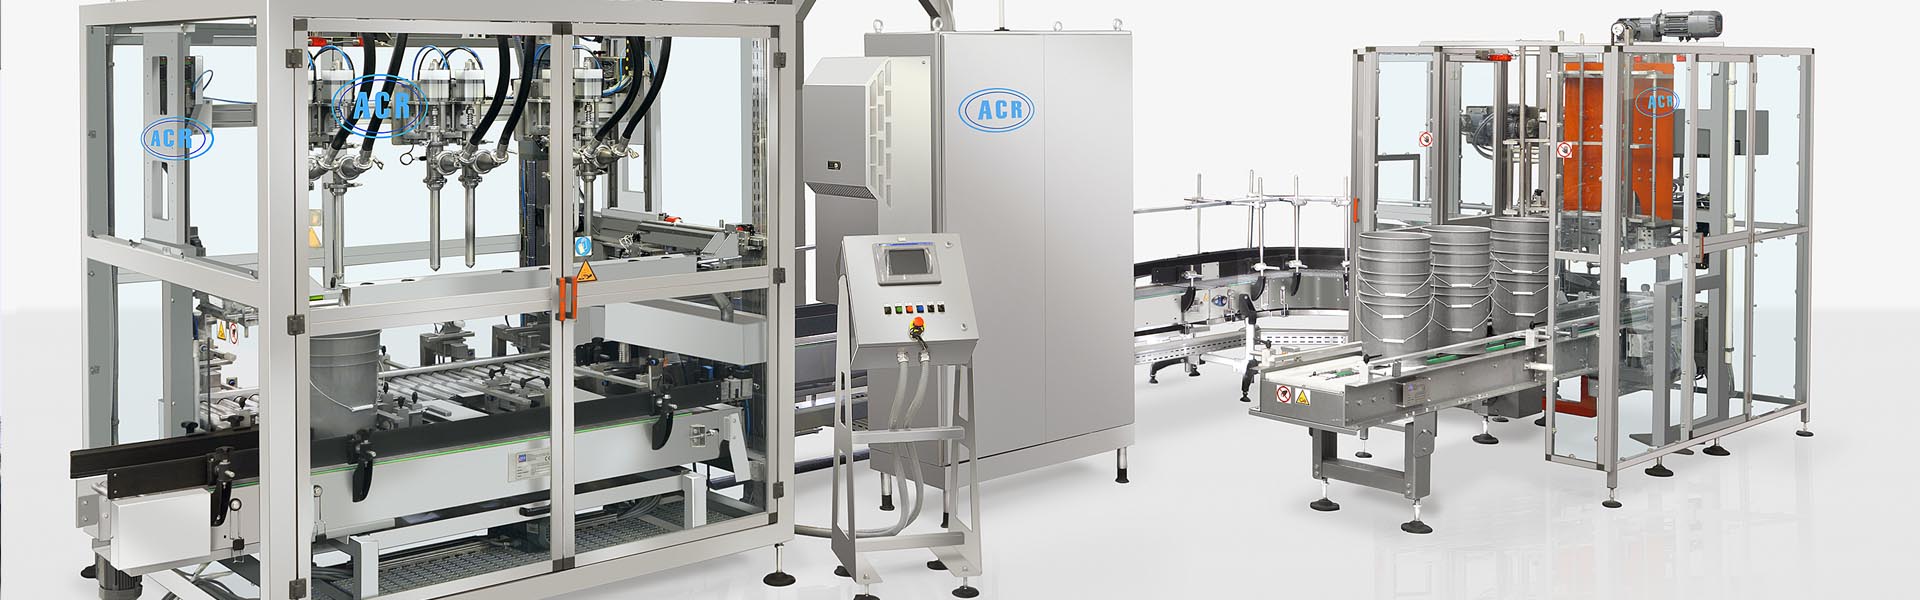 ACR filling and capping machines